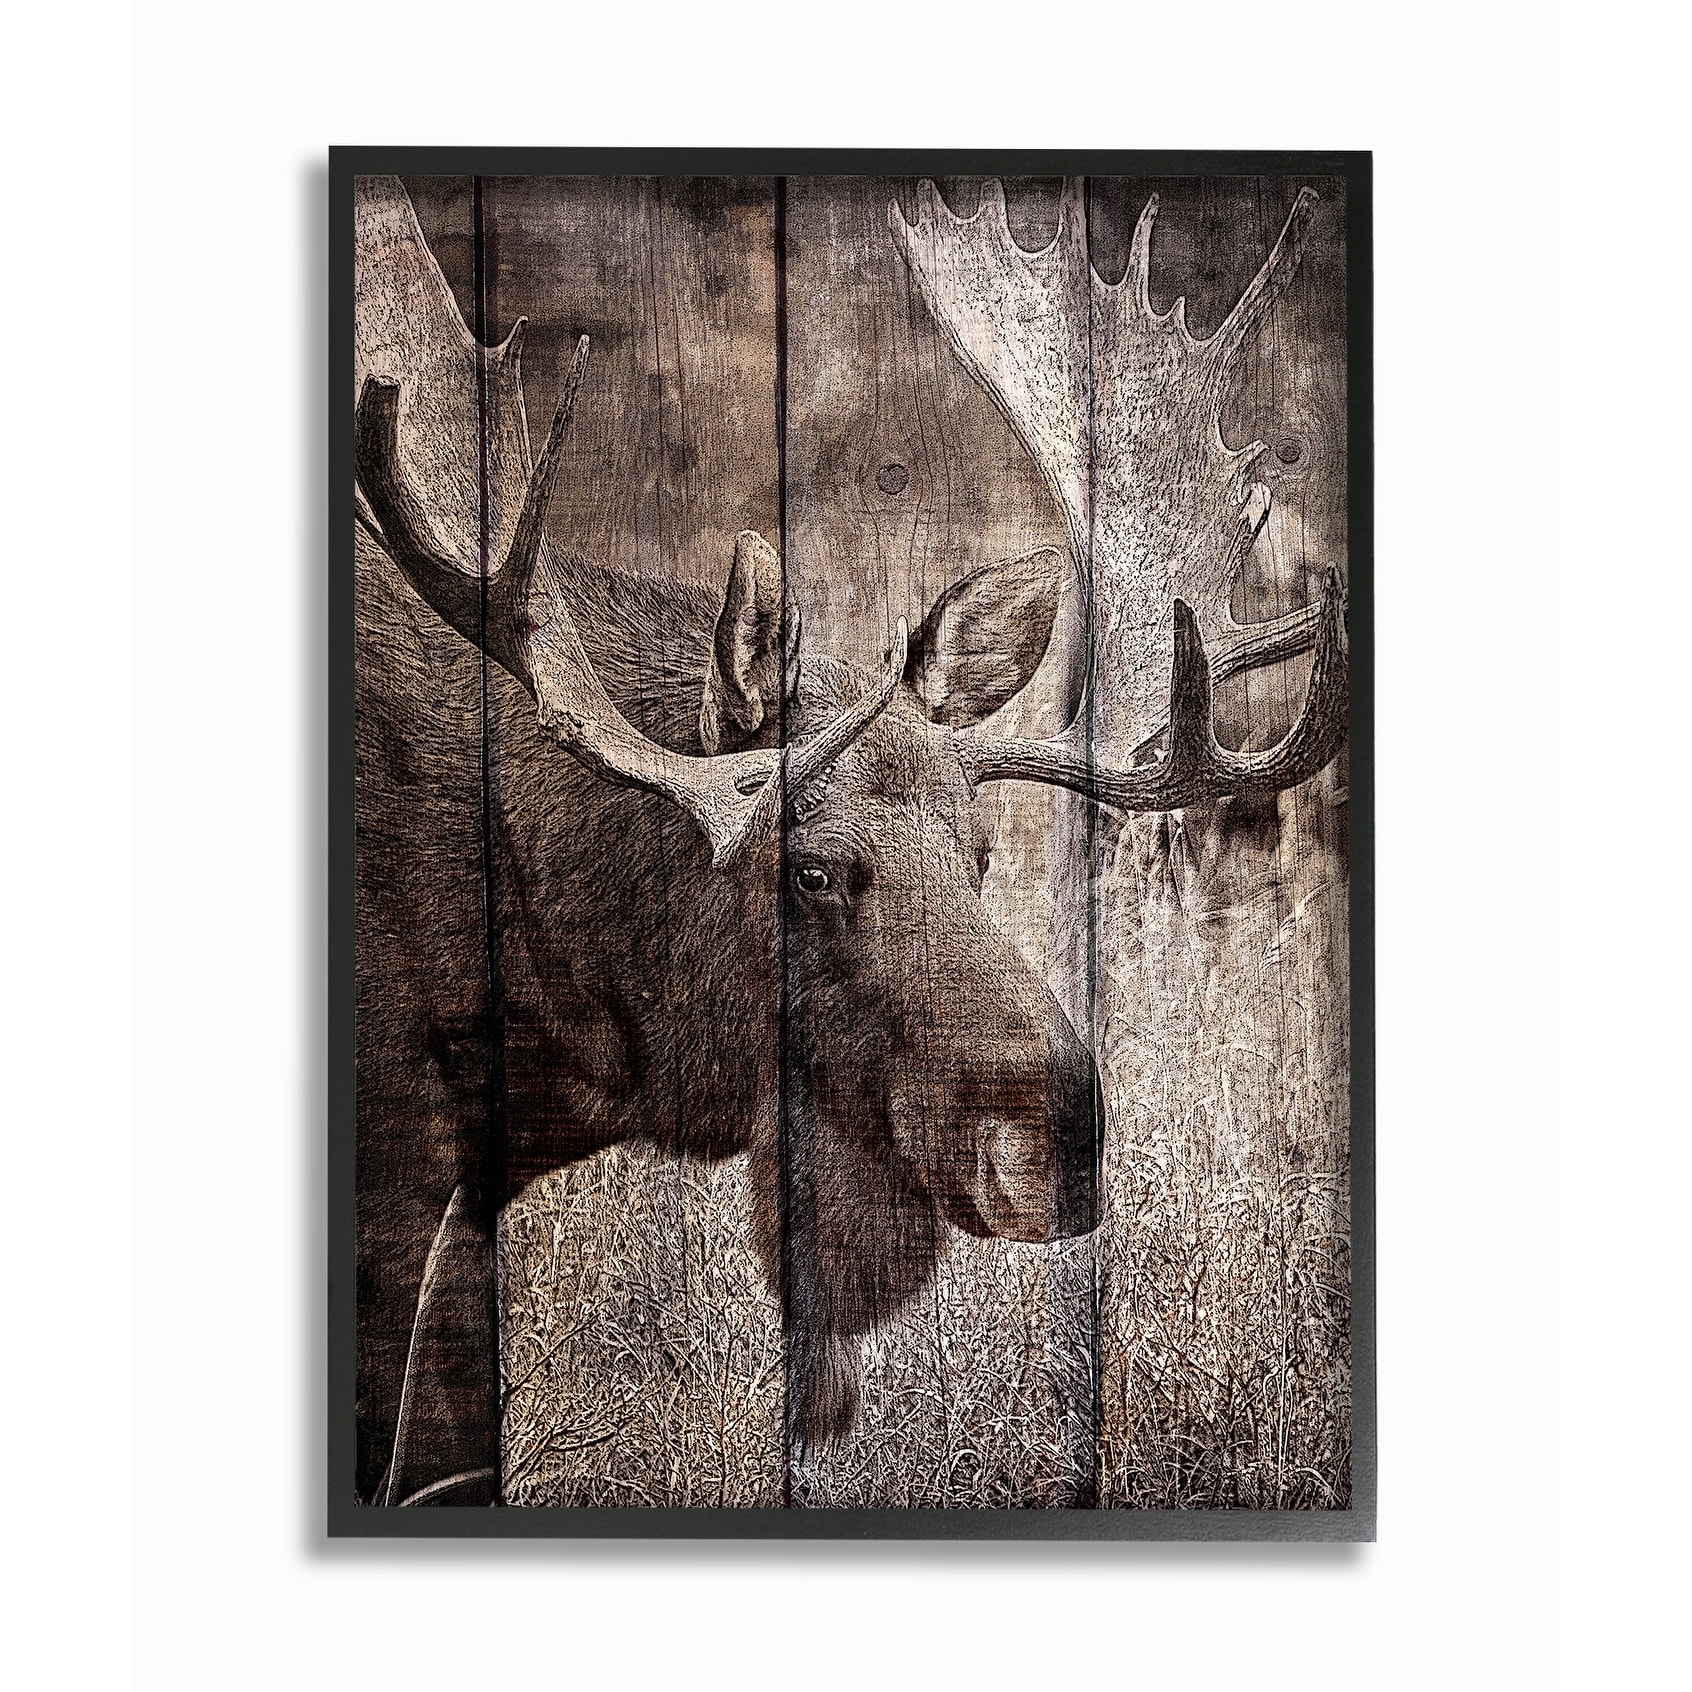 The Stupell Home Decor Brown Moose Planked Look Photography Framed Art, 11  x 14, Design By Artist Kimberly Allen Multi-Color 16 x 20